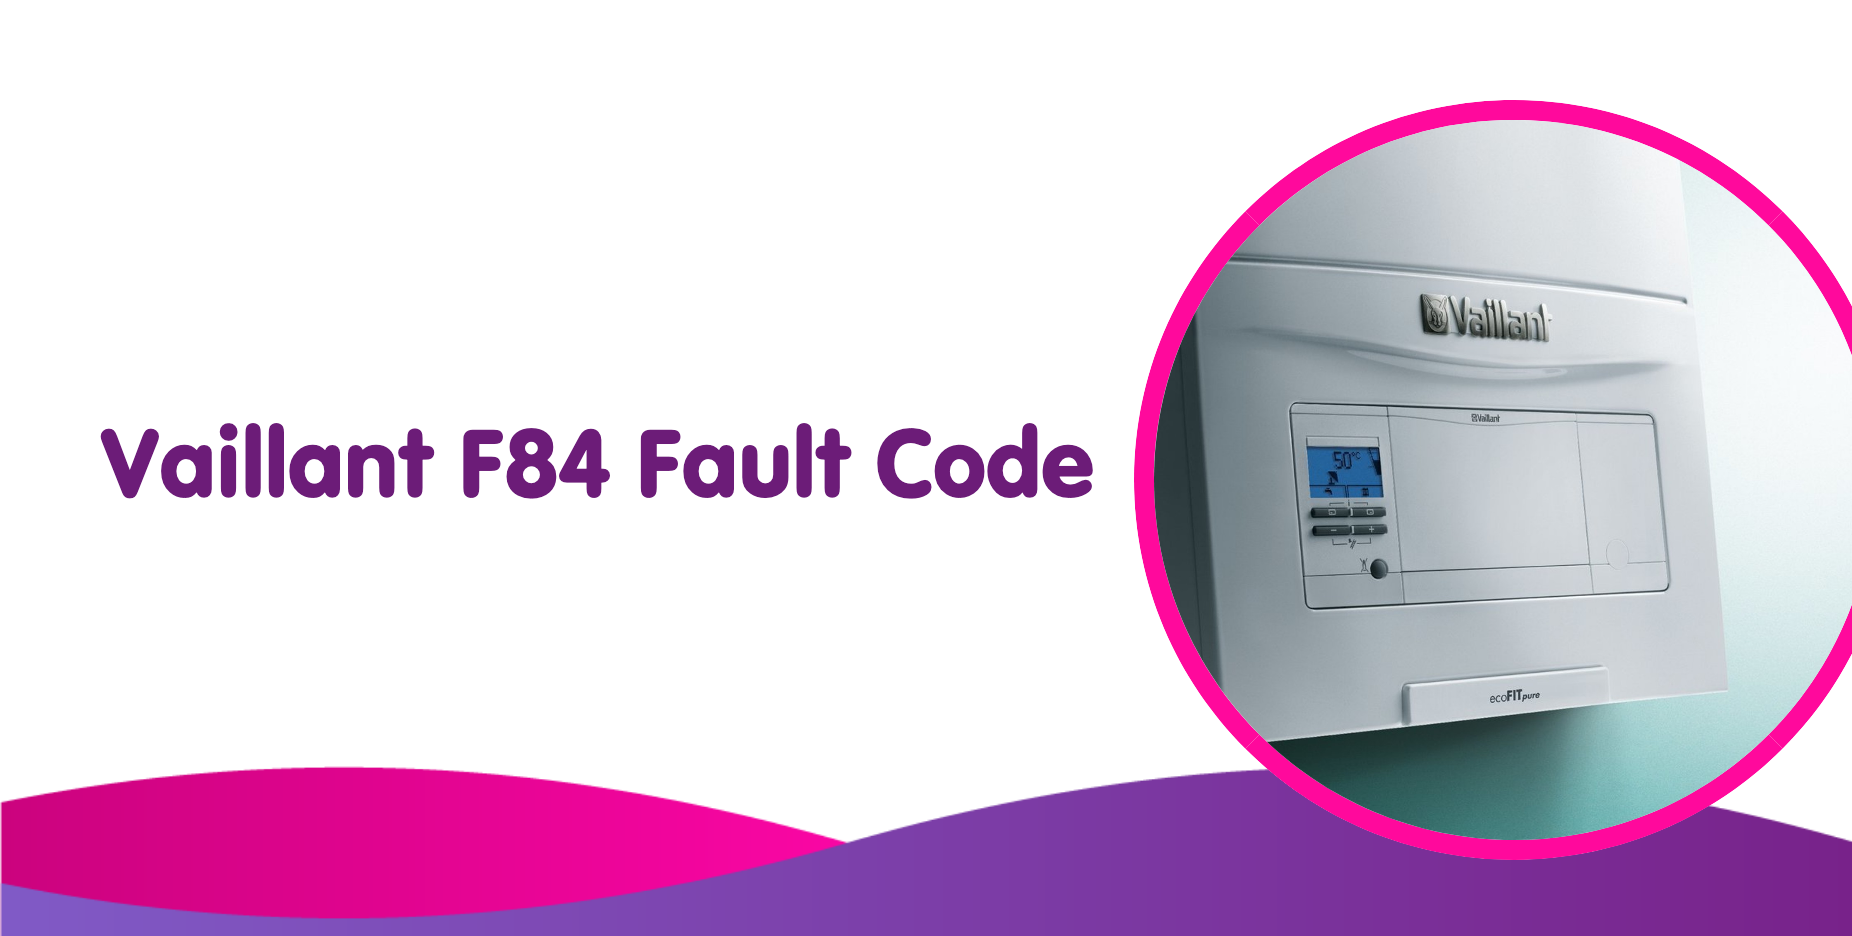 Vaillant F84 Fault Code Meaning, Causes & How To Fix